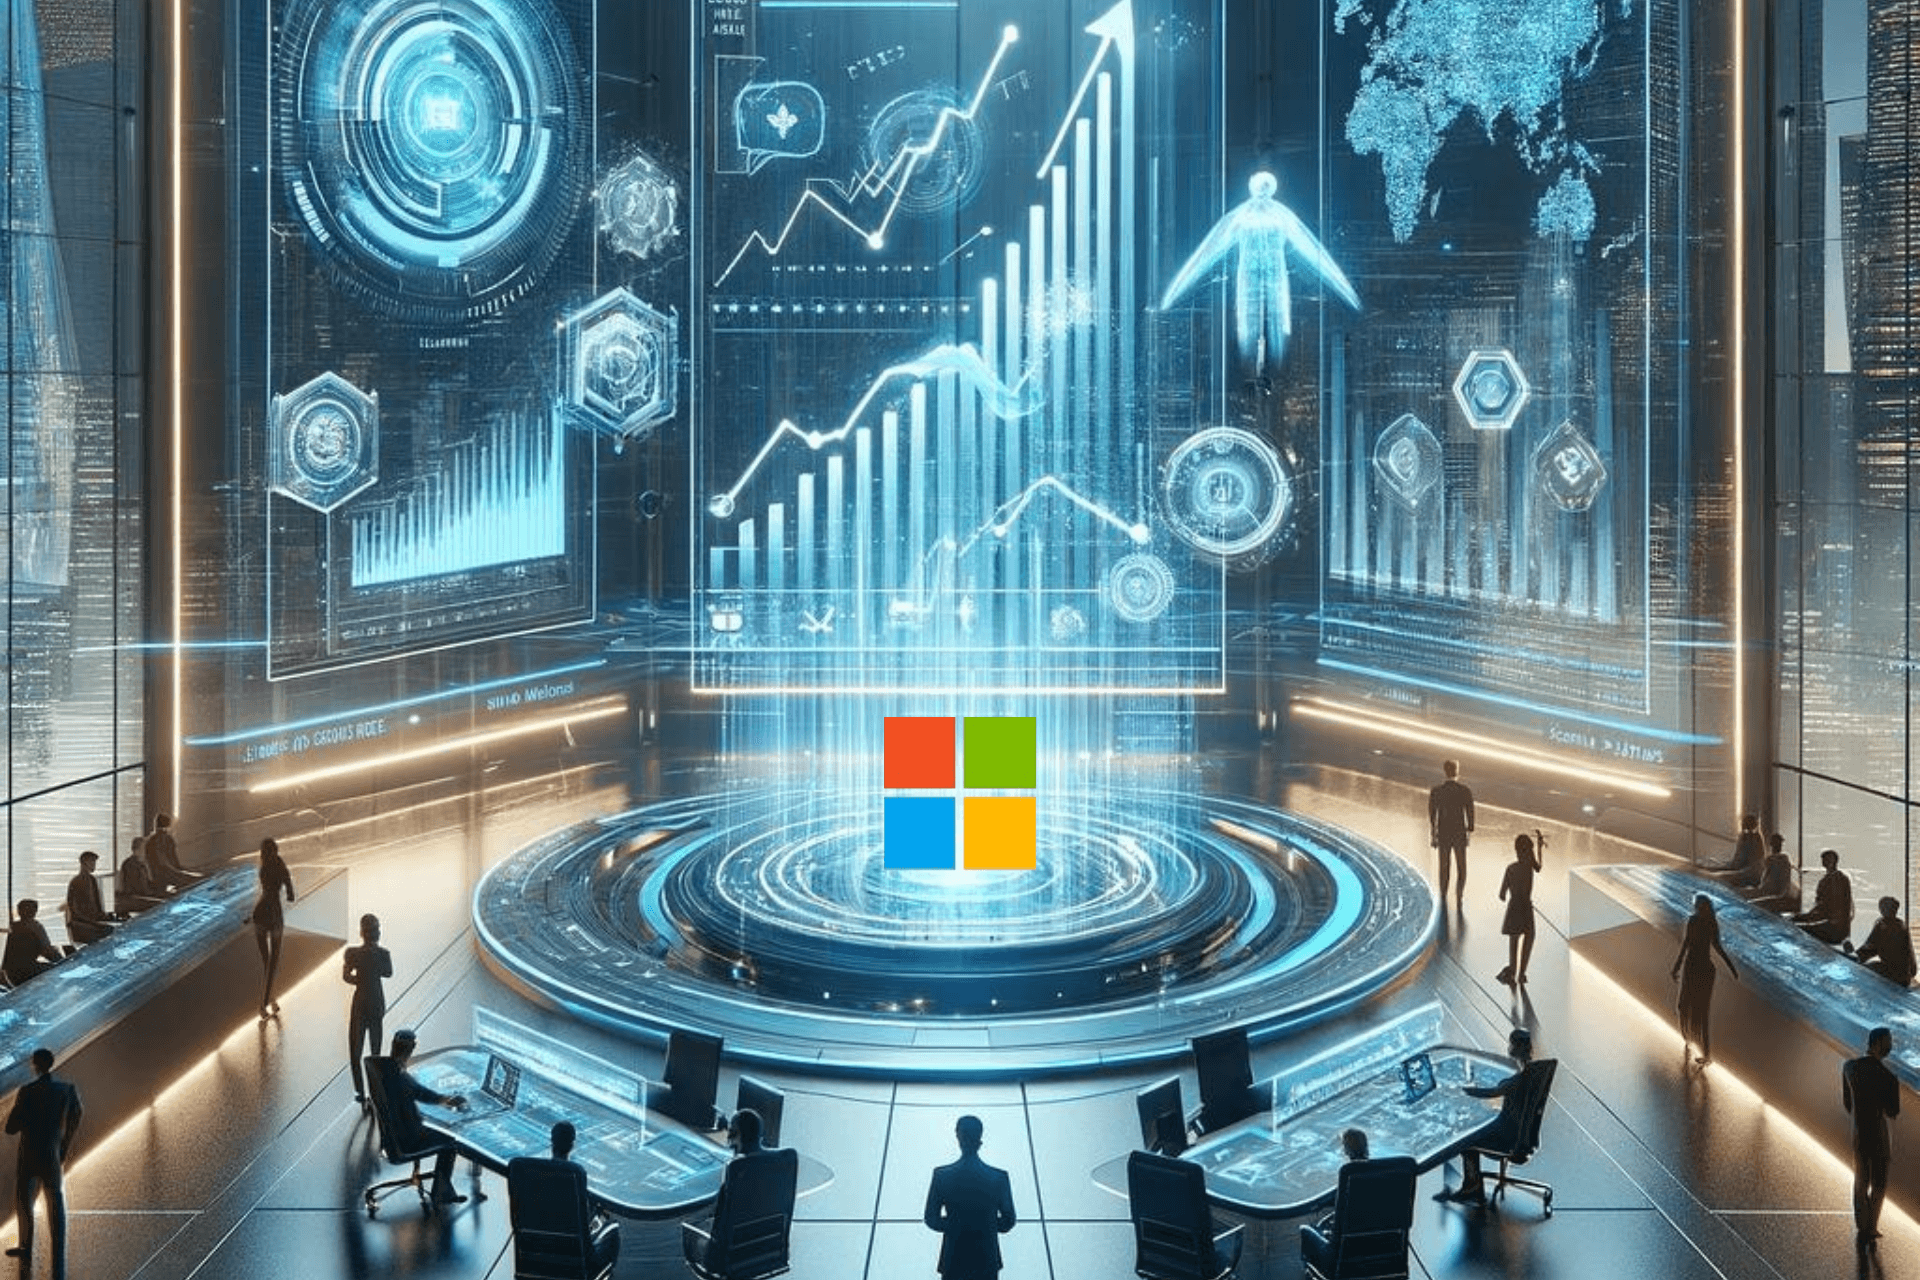 Previewing Microsoft's Q3 earnings: OpenAI boosts its technology aspirations